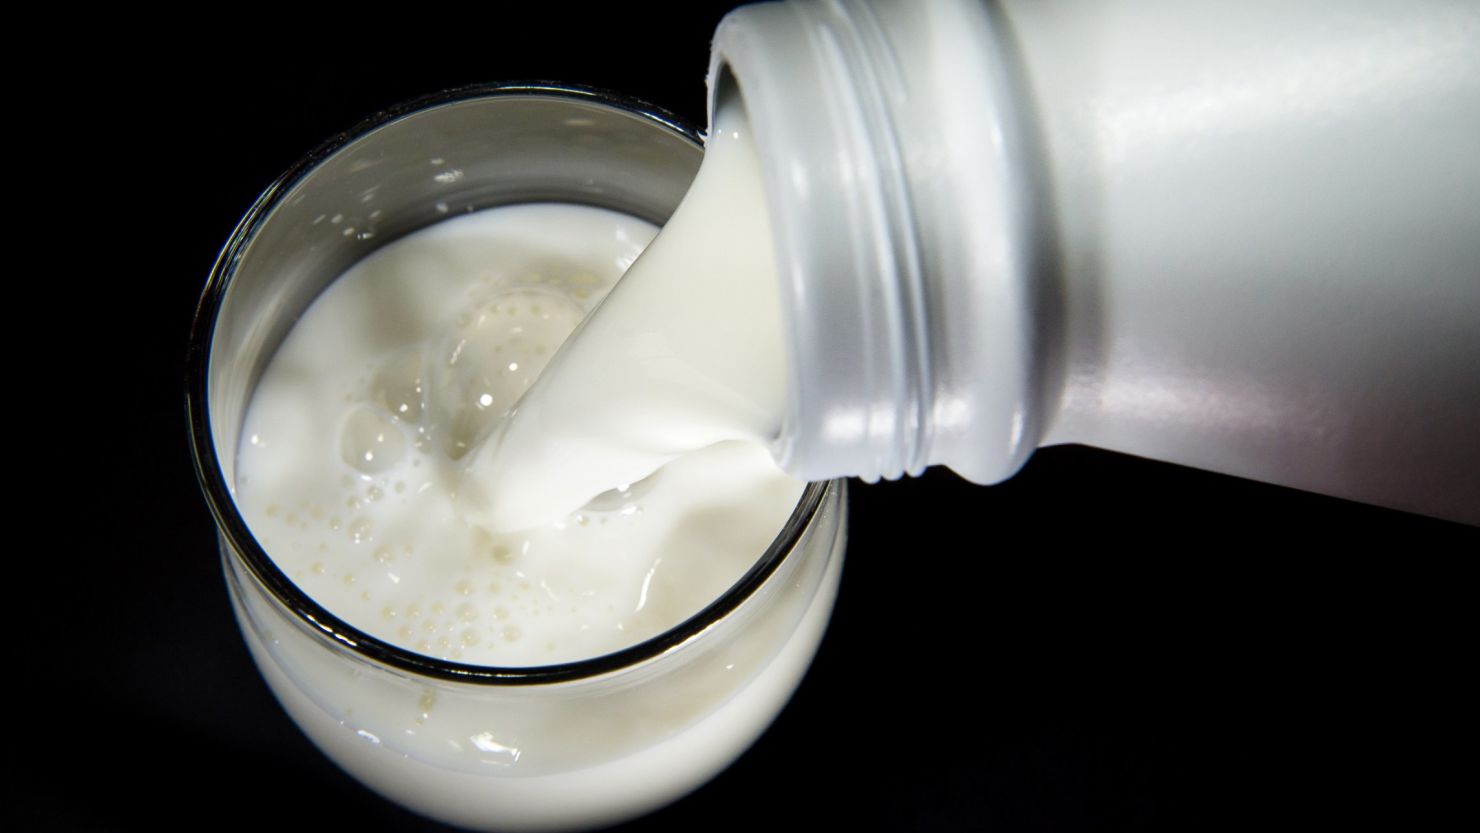 Research shows full-fat milk is best for kids and shouldn't affect their weight. (PHILIPPE HUGUEN/AFP/Getty Images)